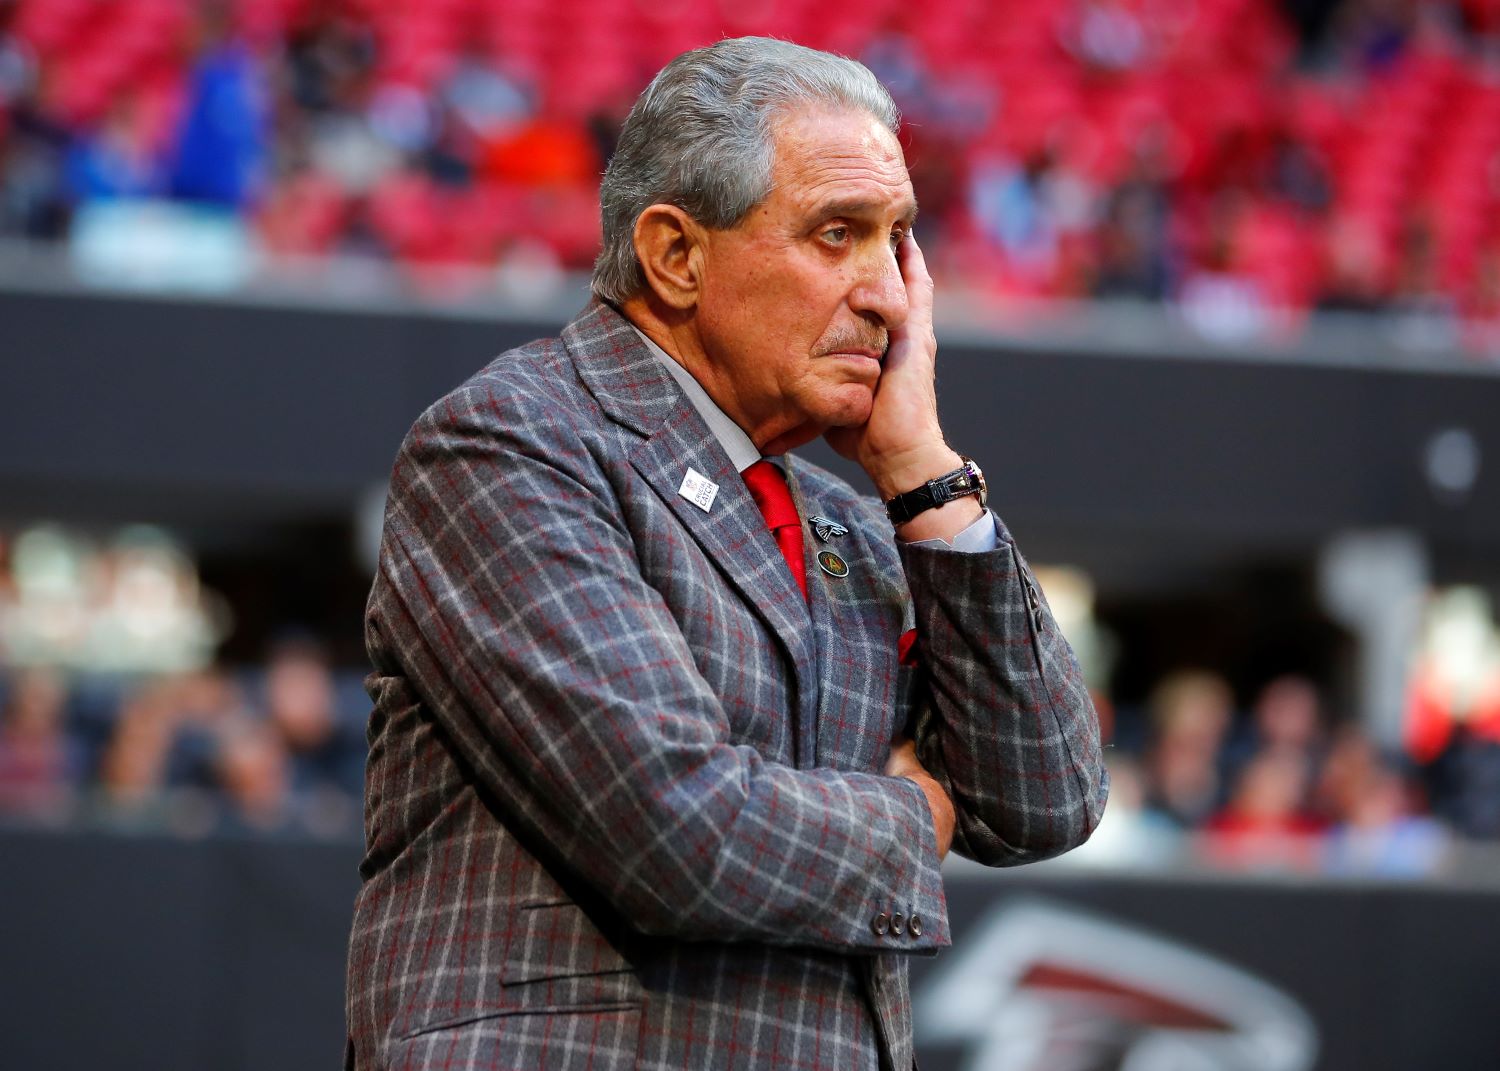 The Atlanta Falcons are targeting an ESPN analyst for their general manager vacancy.